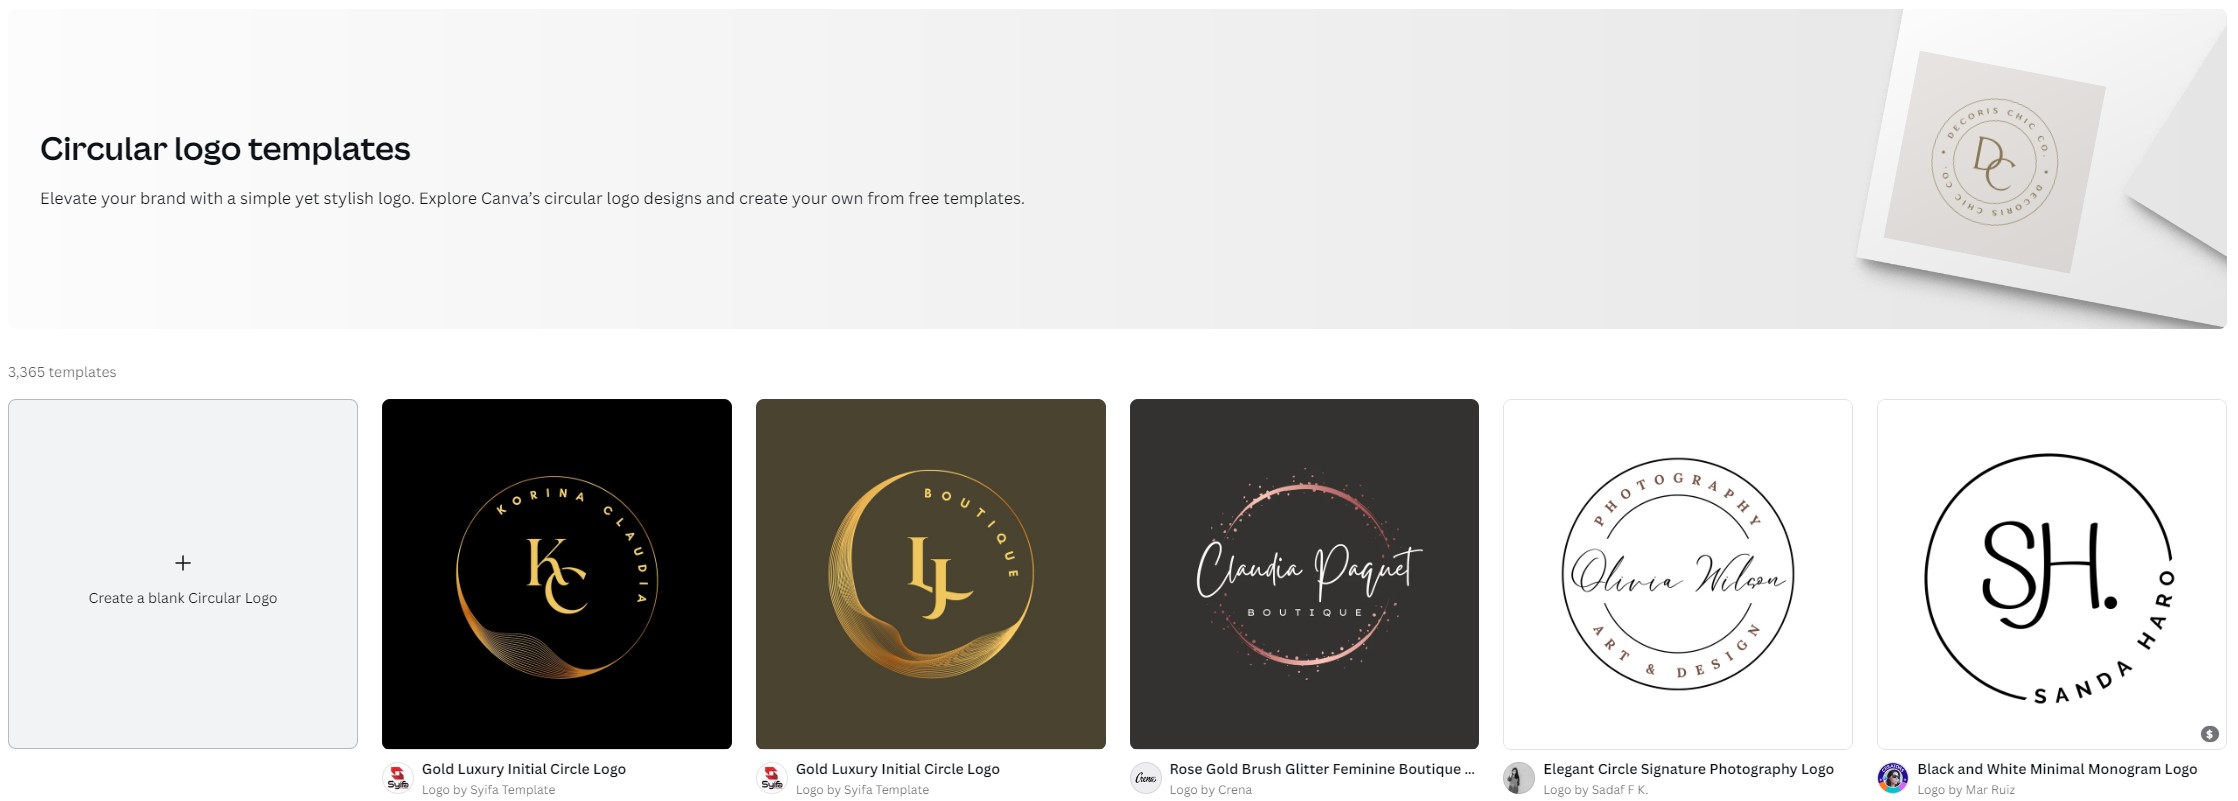 How Do I Create a Round Logo in Canva? | design tutorials and guides